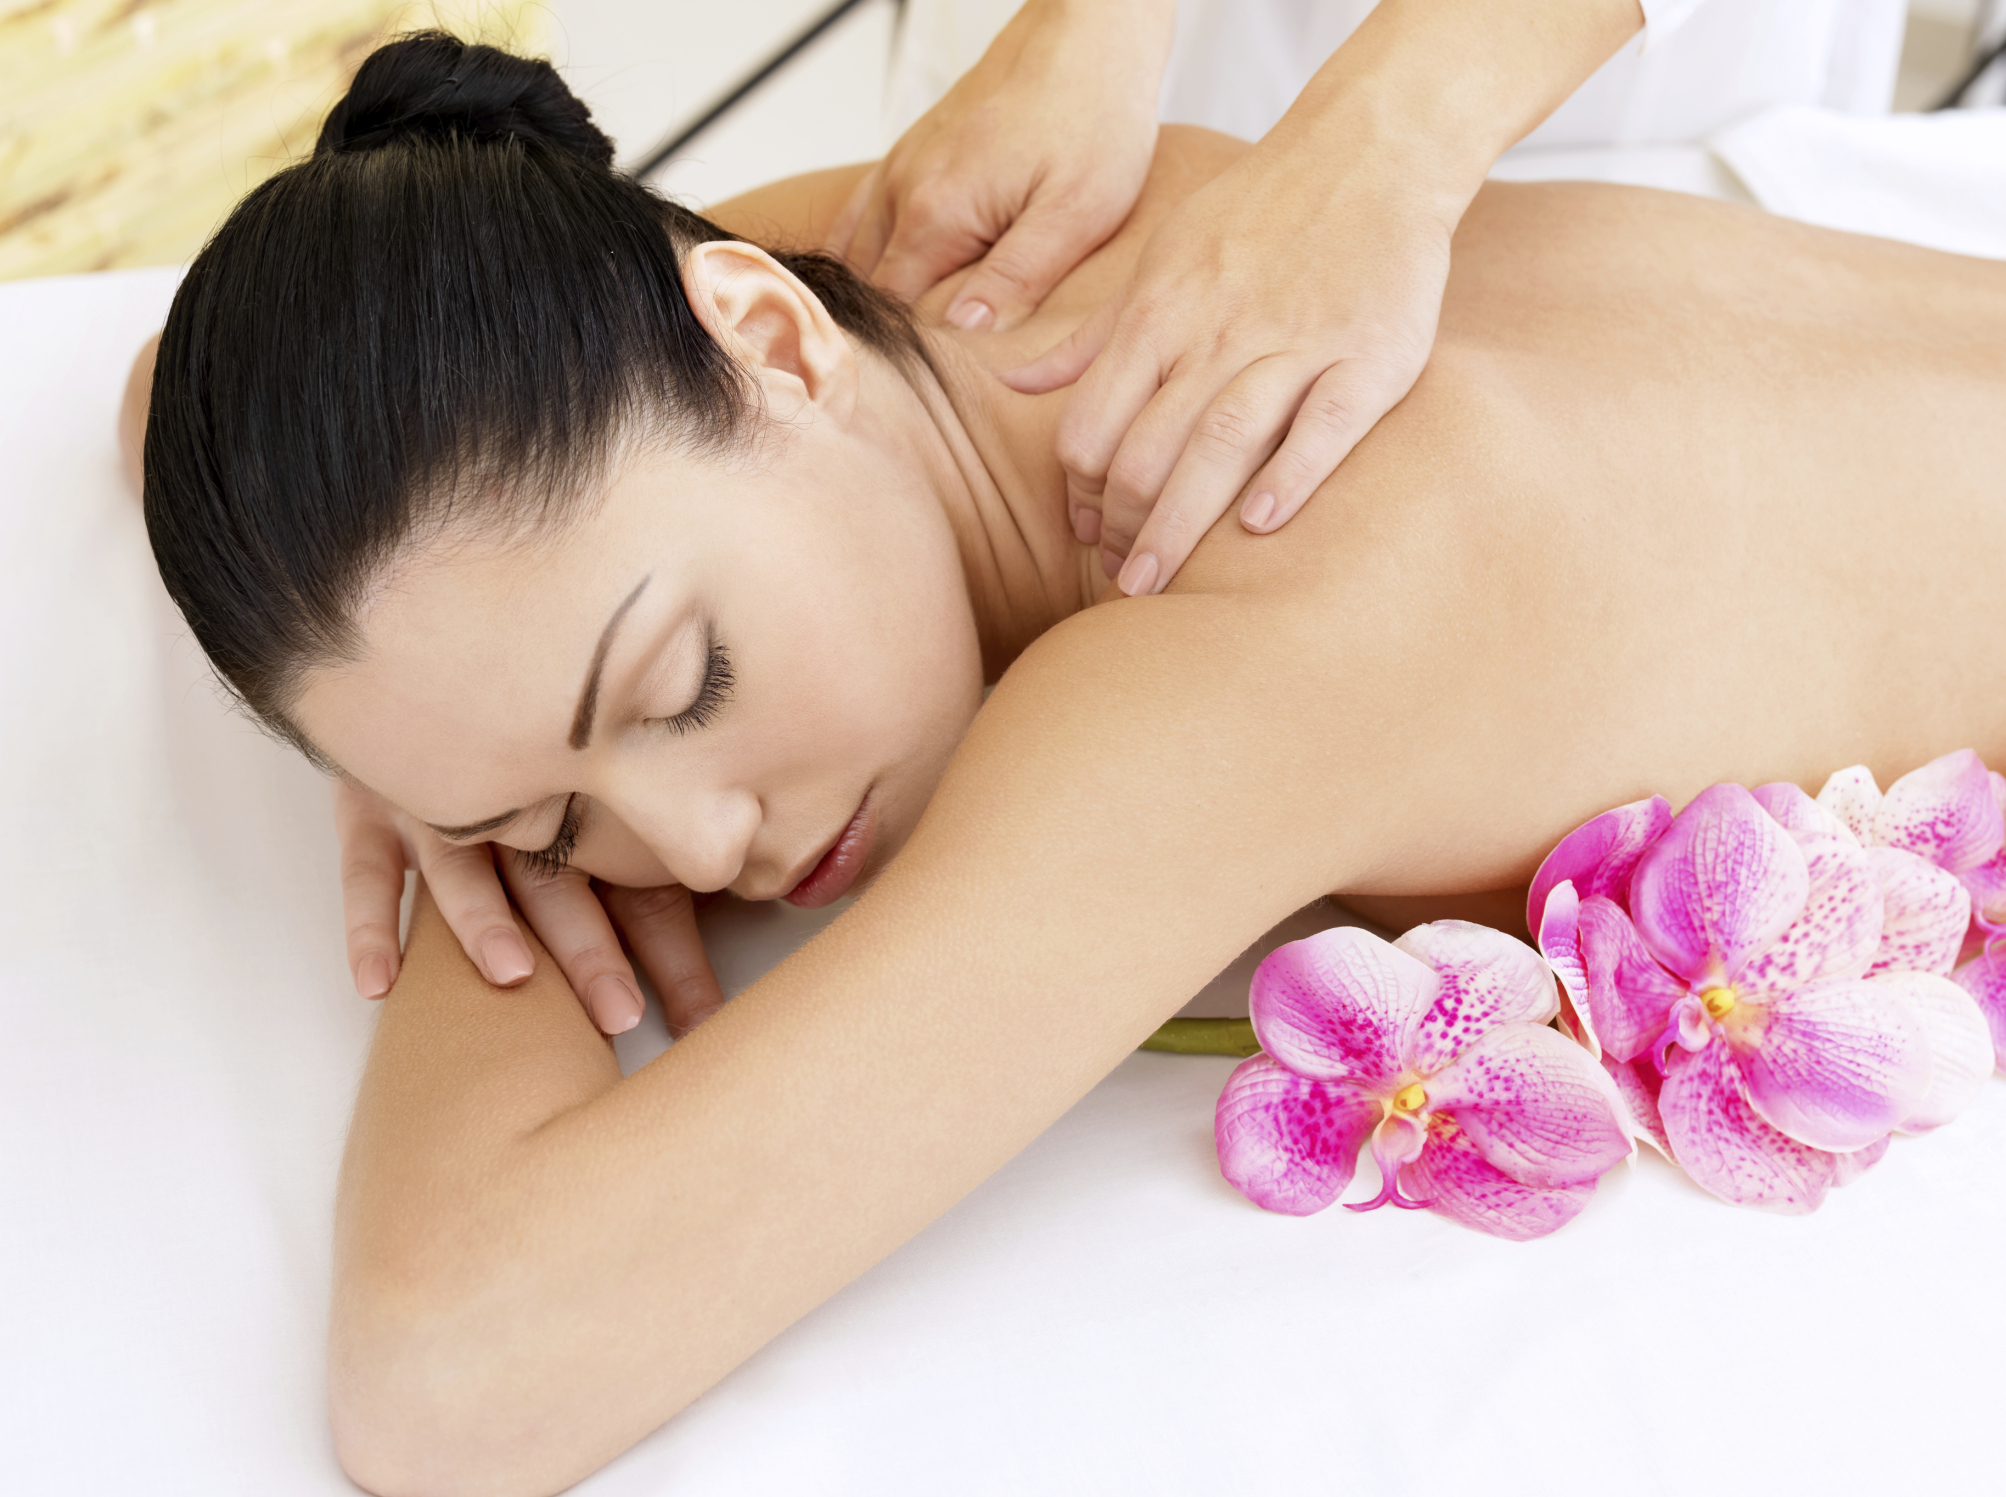 Different types of therapeutic massages